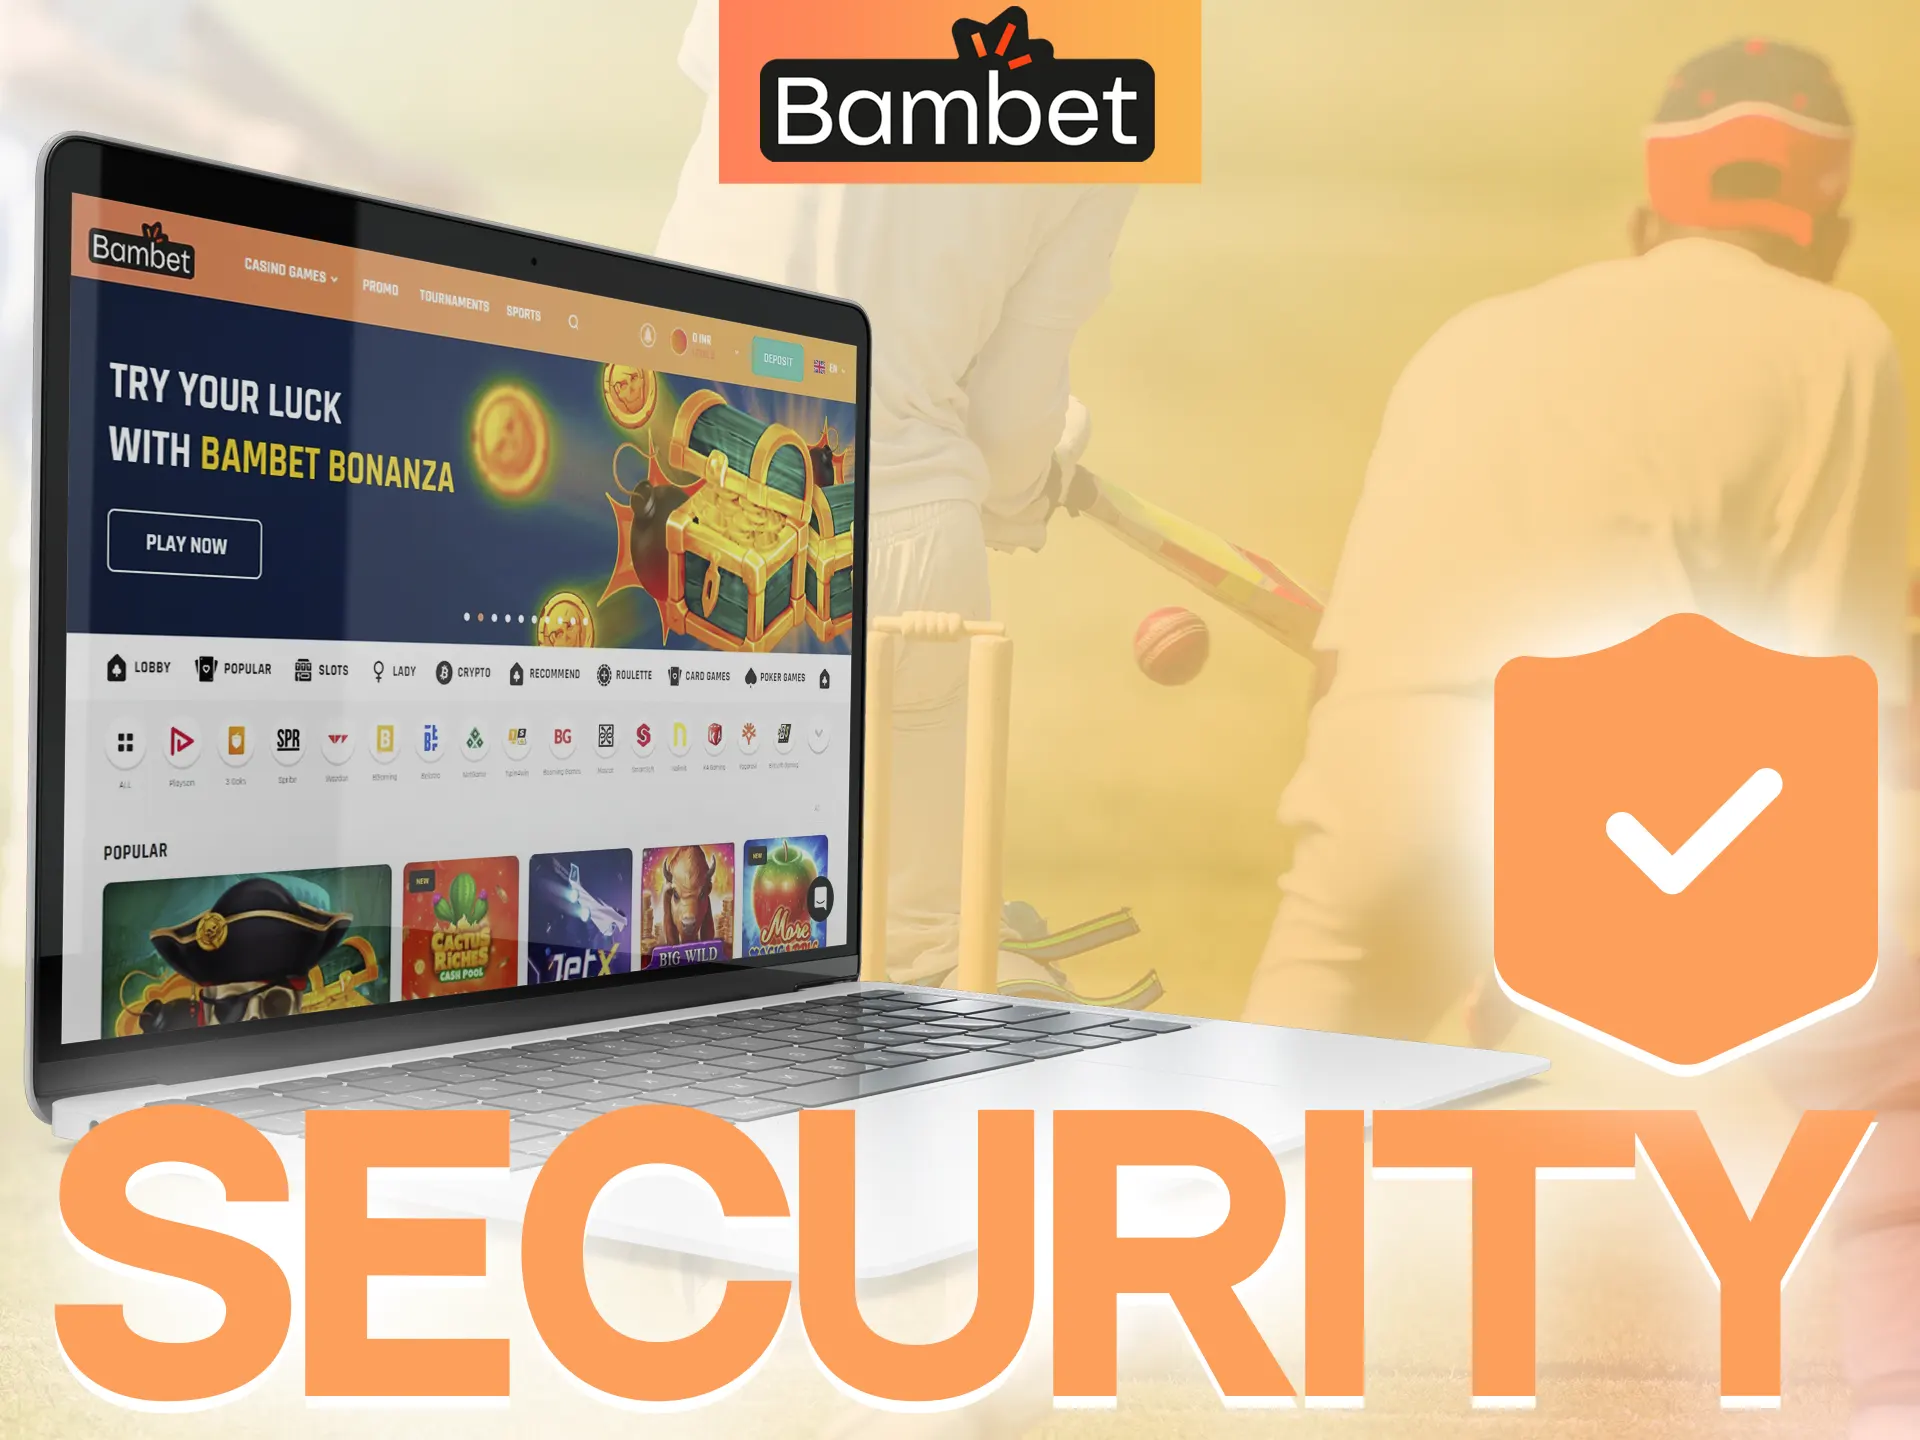 The Bambet site will keep your data secure.